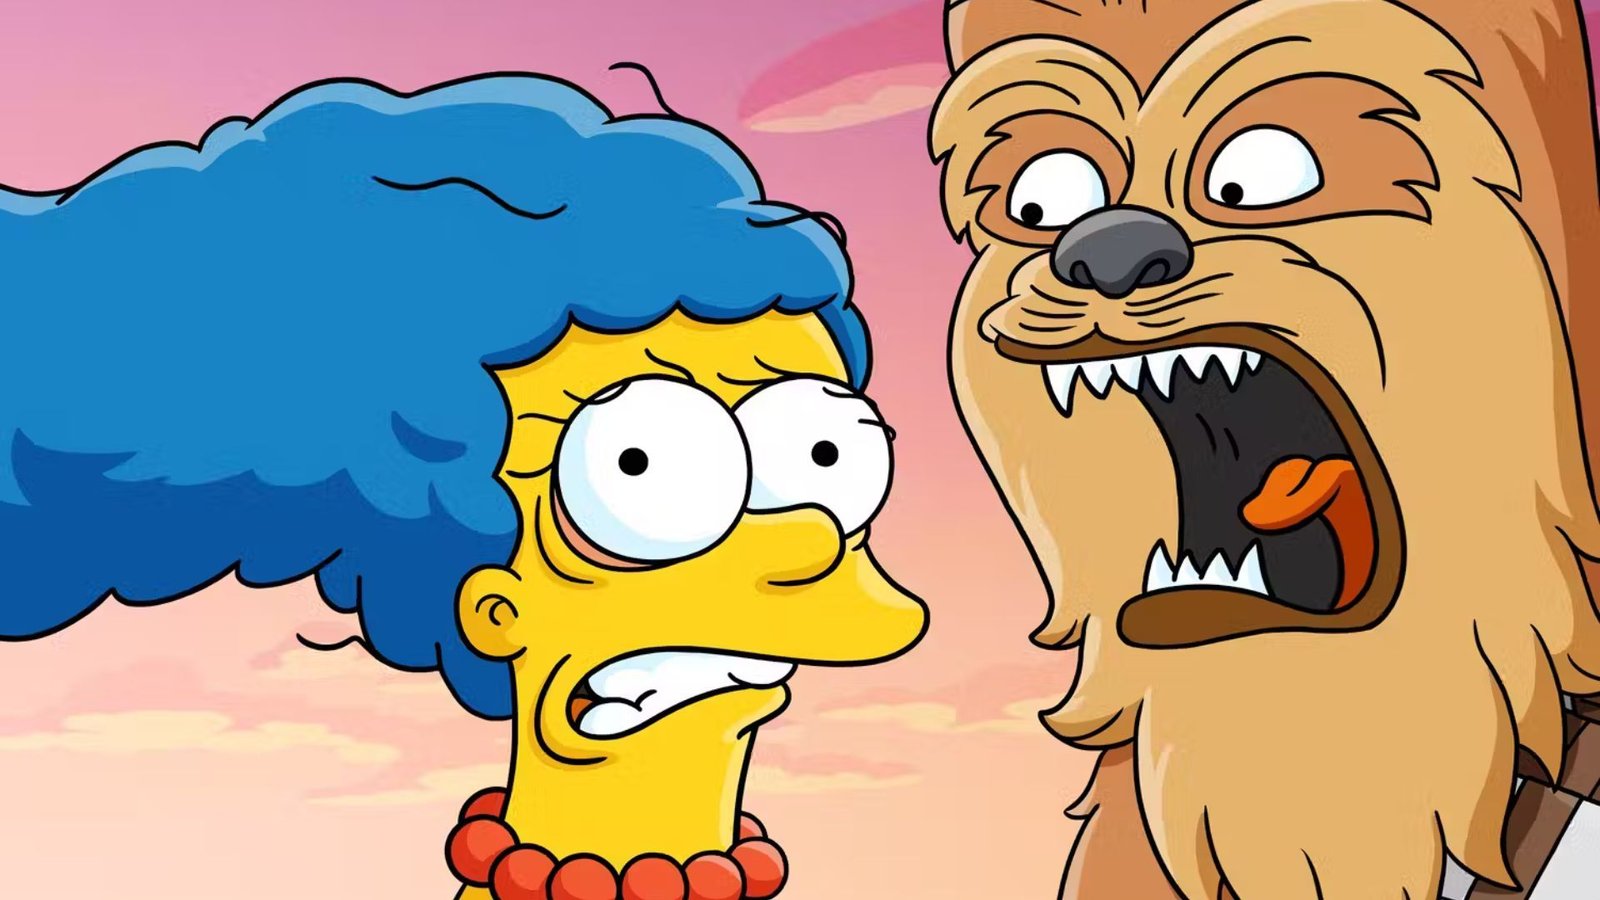 The Simpsons and Star Wars Team Up for a Mother's Day Adventure